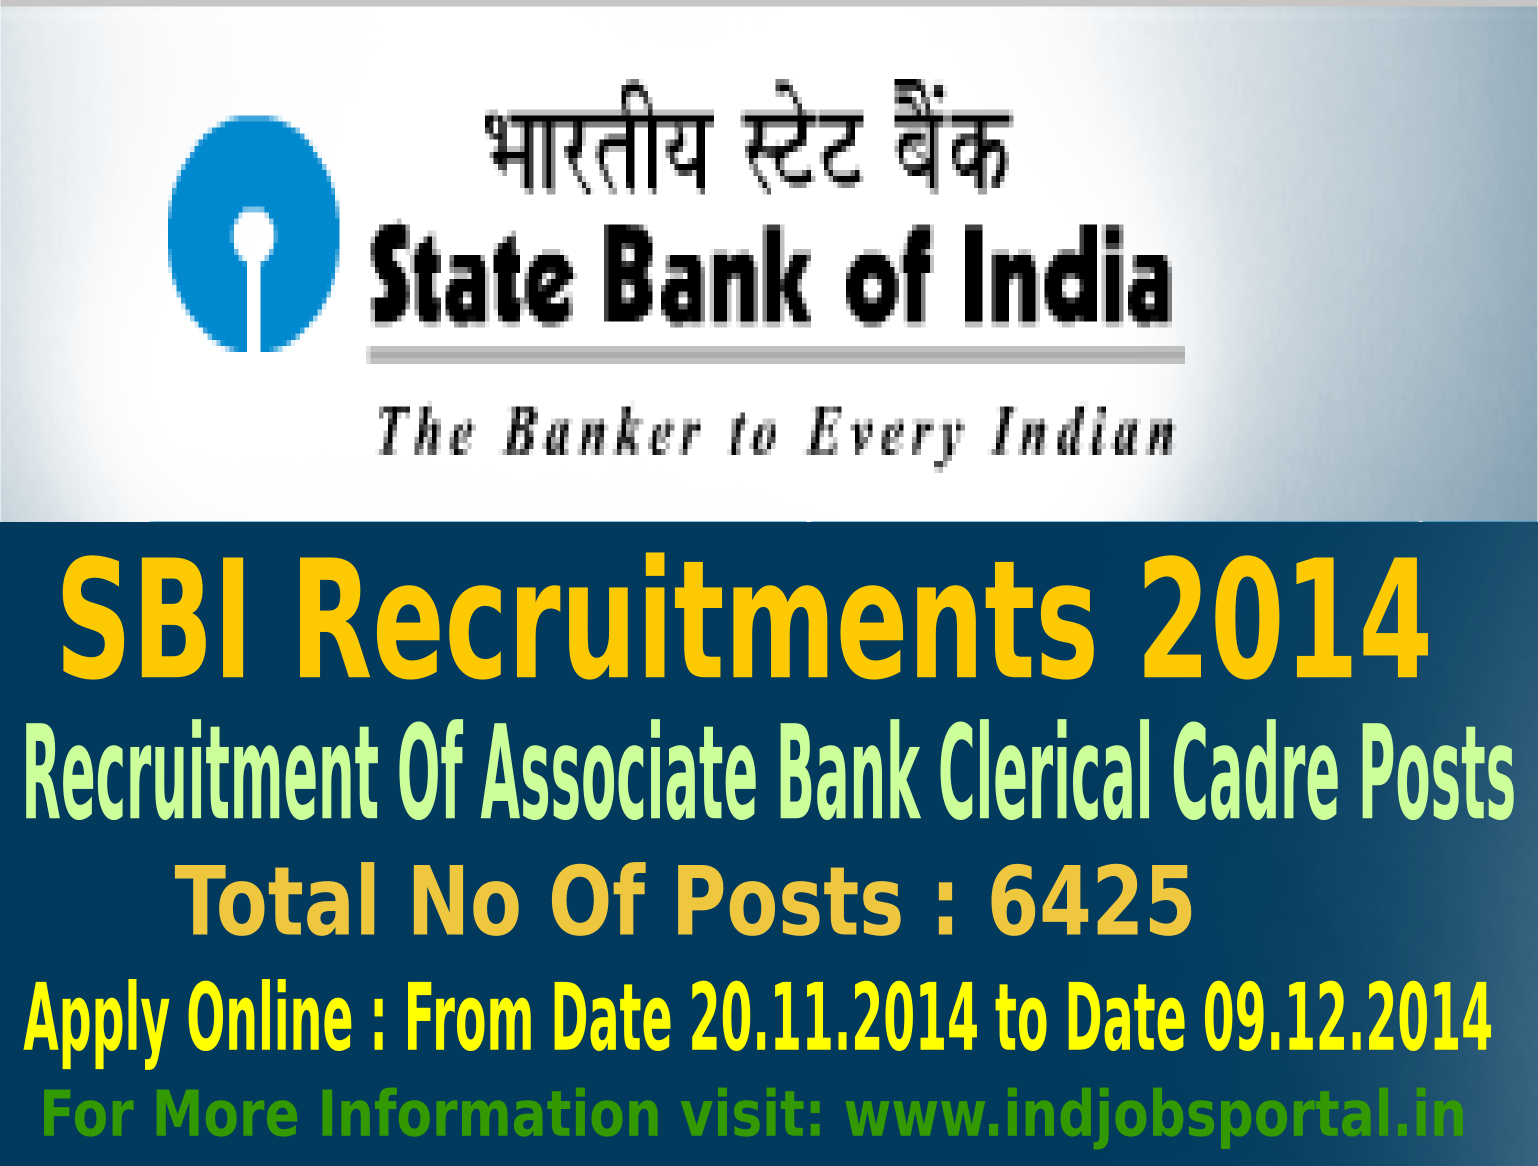 SBI Recruitment 2014 For Associate Bank Clerical Cadre Posts